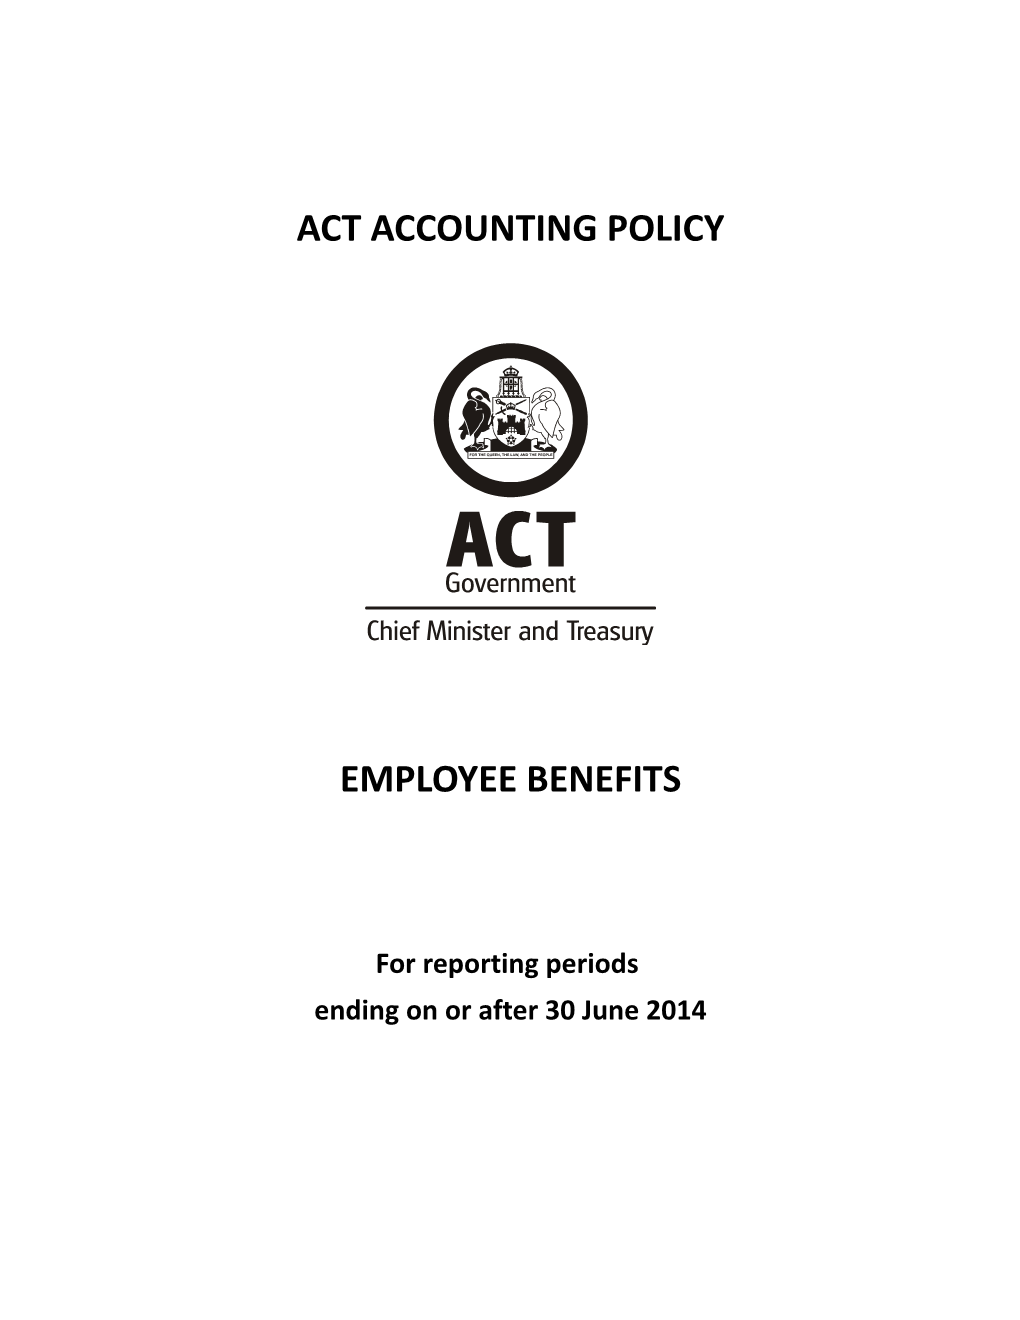 Act Accounting Policy